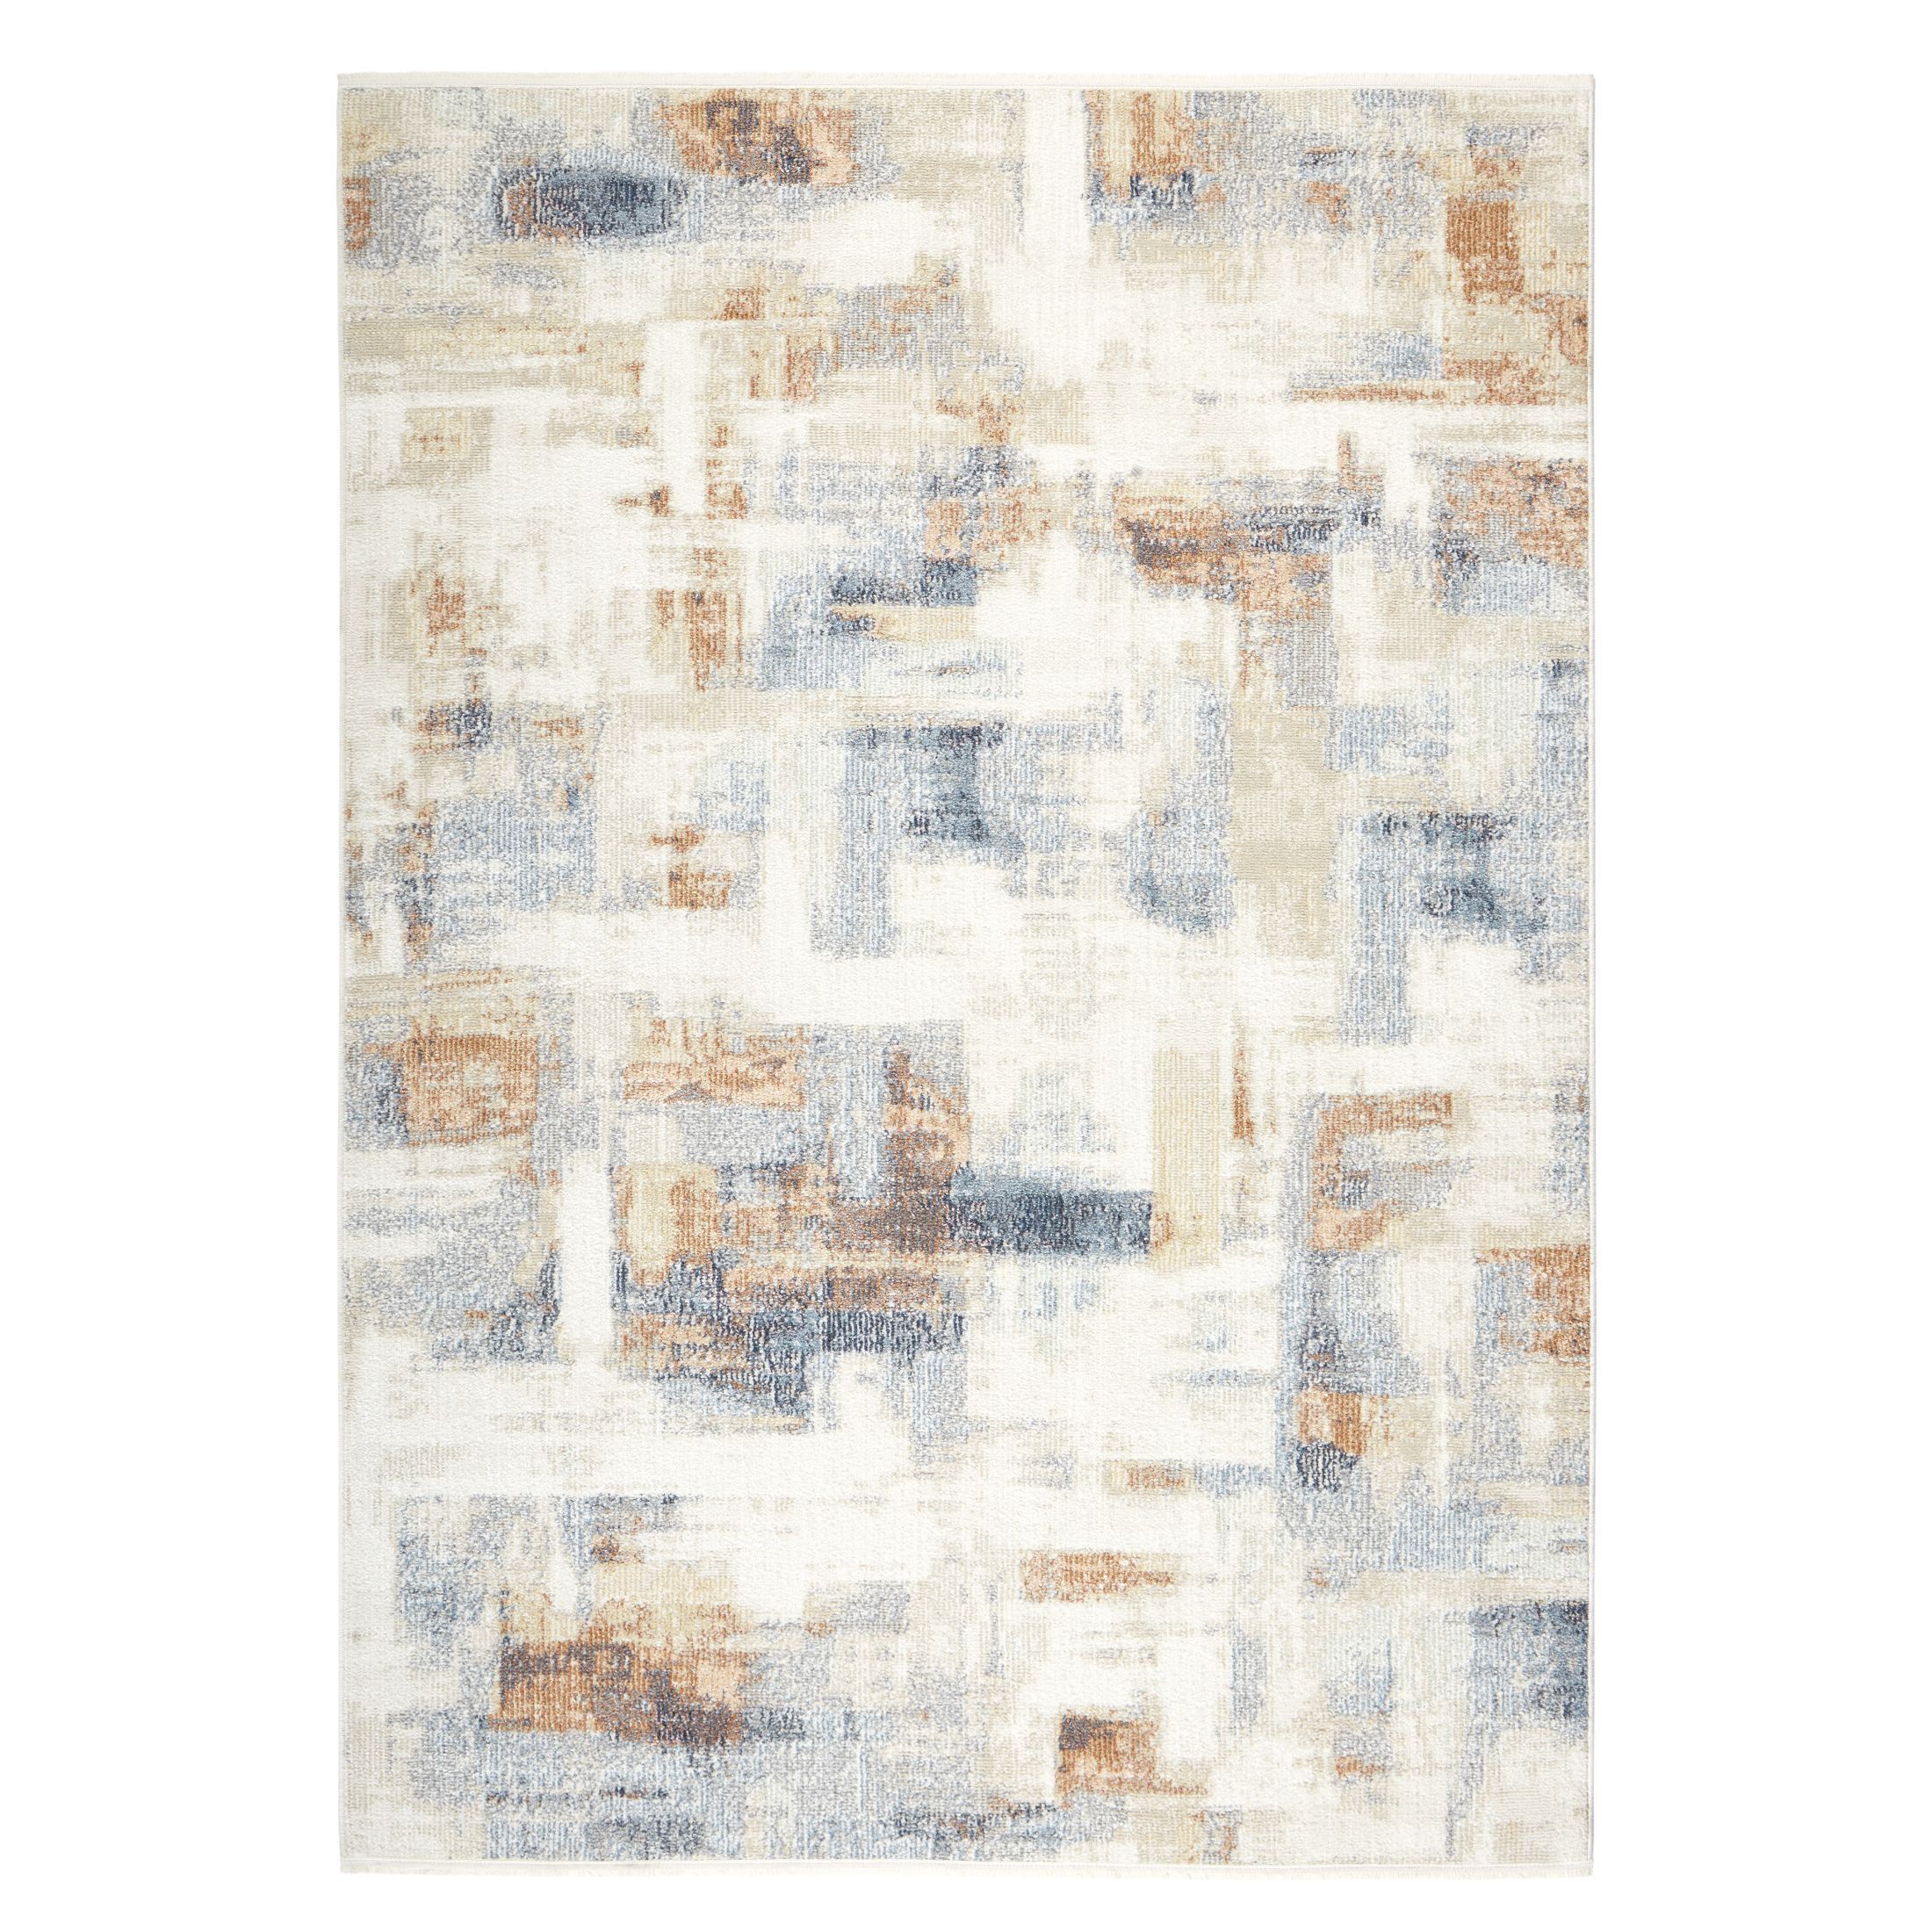 Mainstays Neutral Abstract Washable Indoor Area Rug, Abstract Neutral, 5'x7' - image 1 of 5